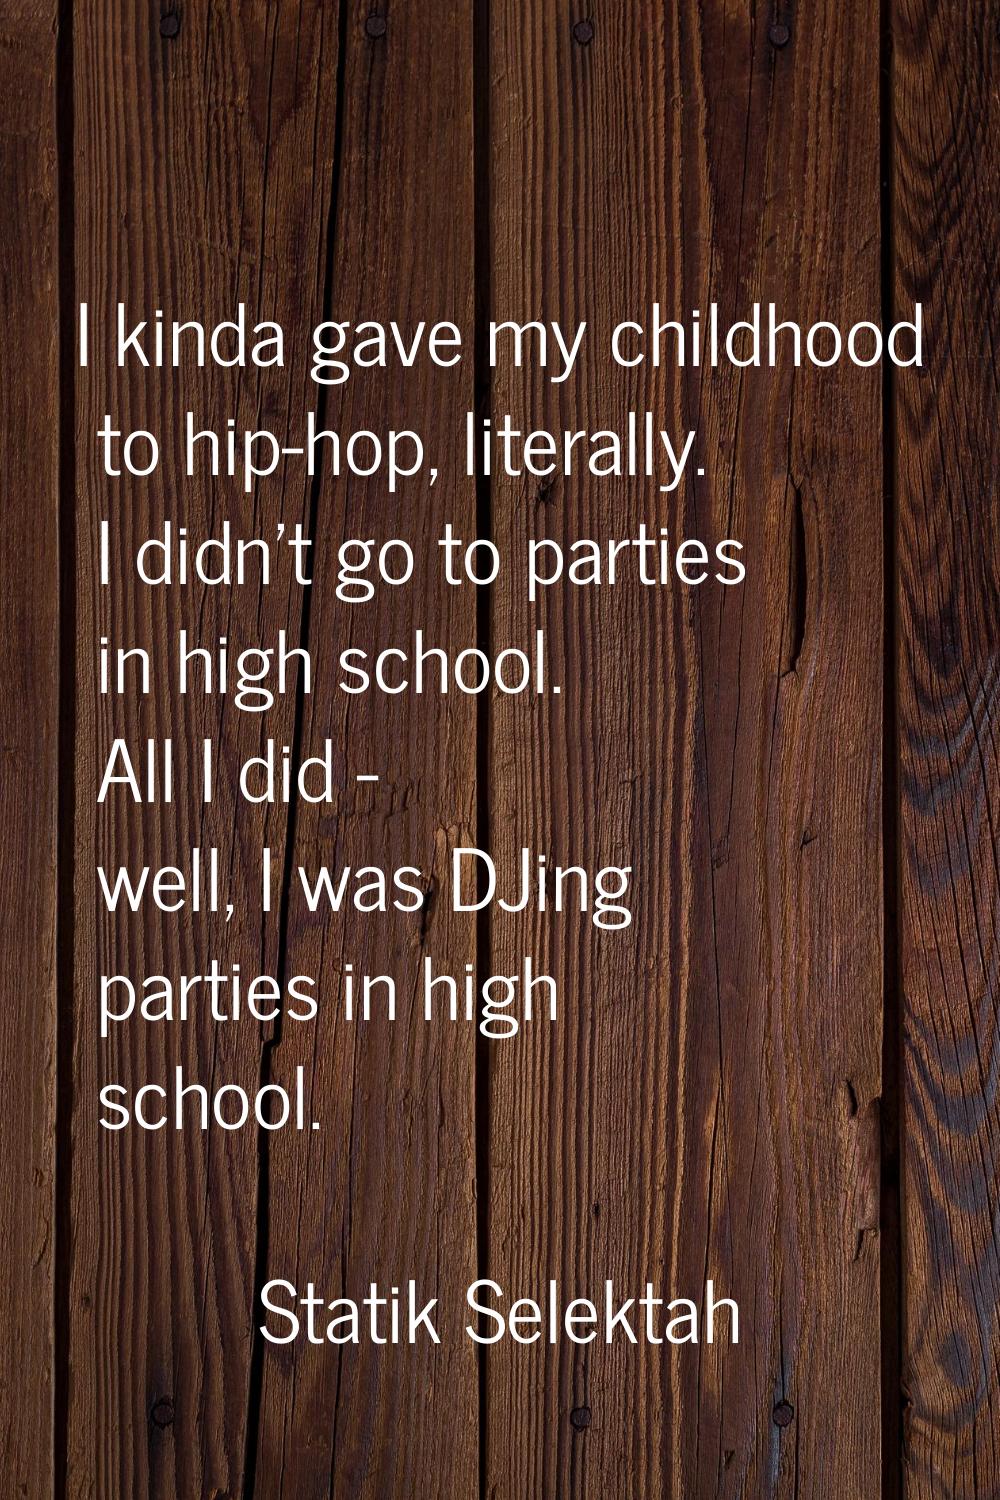 I kinda gave my childhood to hip-hop, literally. I didn't go to parties in high school. All I did -